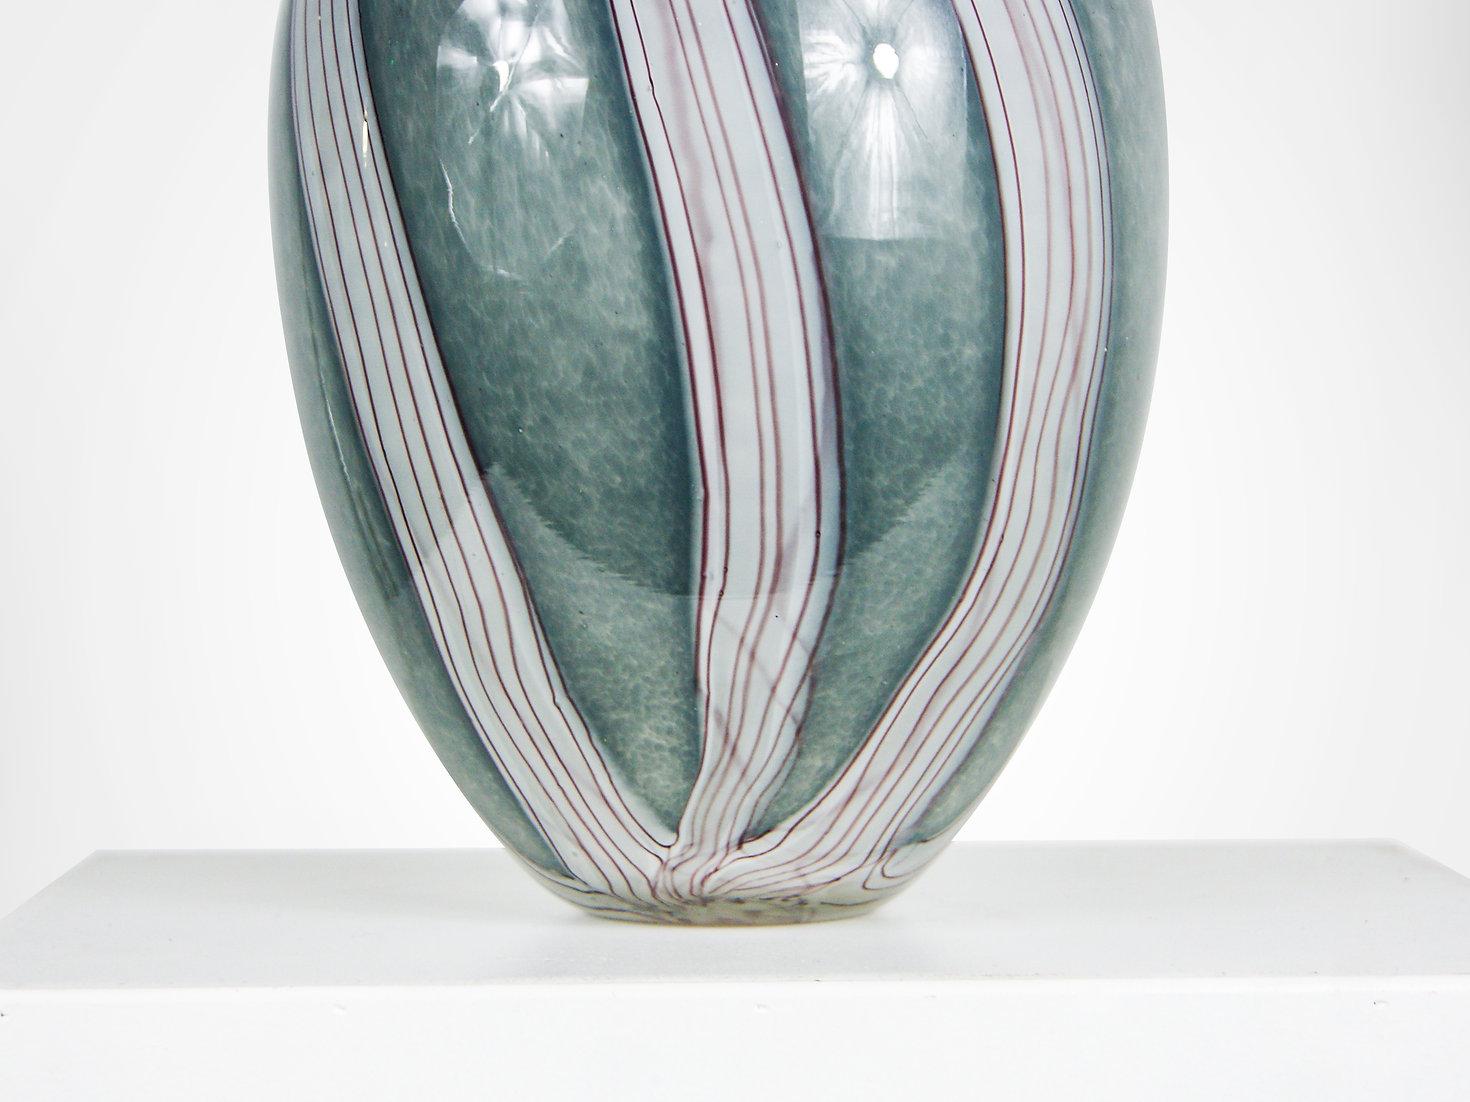 Huge Murano sommerso glass vase by Luigi Onesto, circa 1950s.
Unusual chunky and heavy glass vase in cloudy silver grey colour. 
With a submerged core of white lava with thin red stripes running through. The interior is of white (milk)